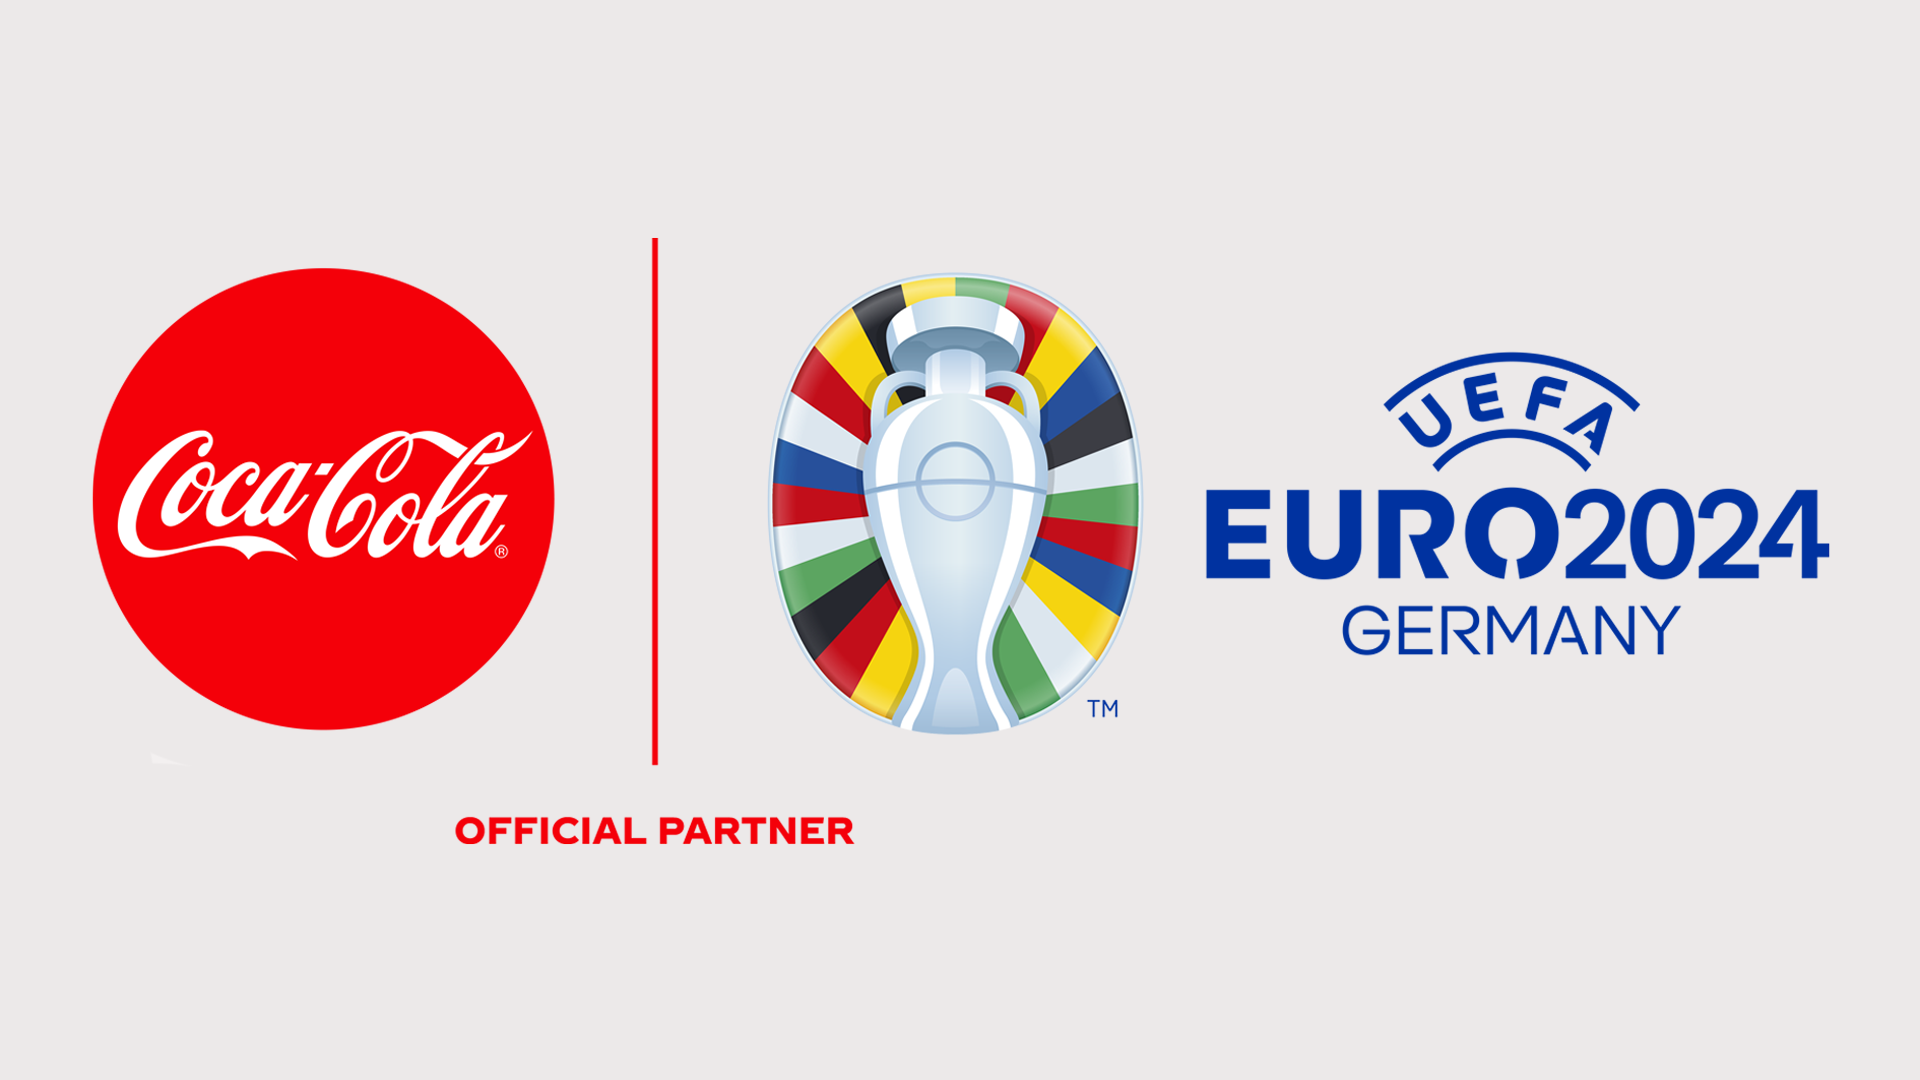   Coca‑Cola solidifies its relationship of over 35 years with UEFA